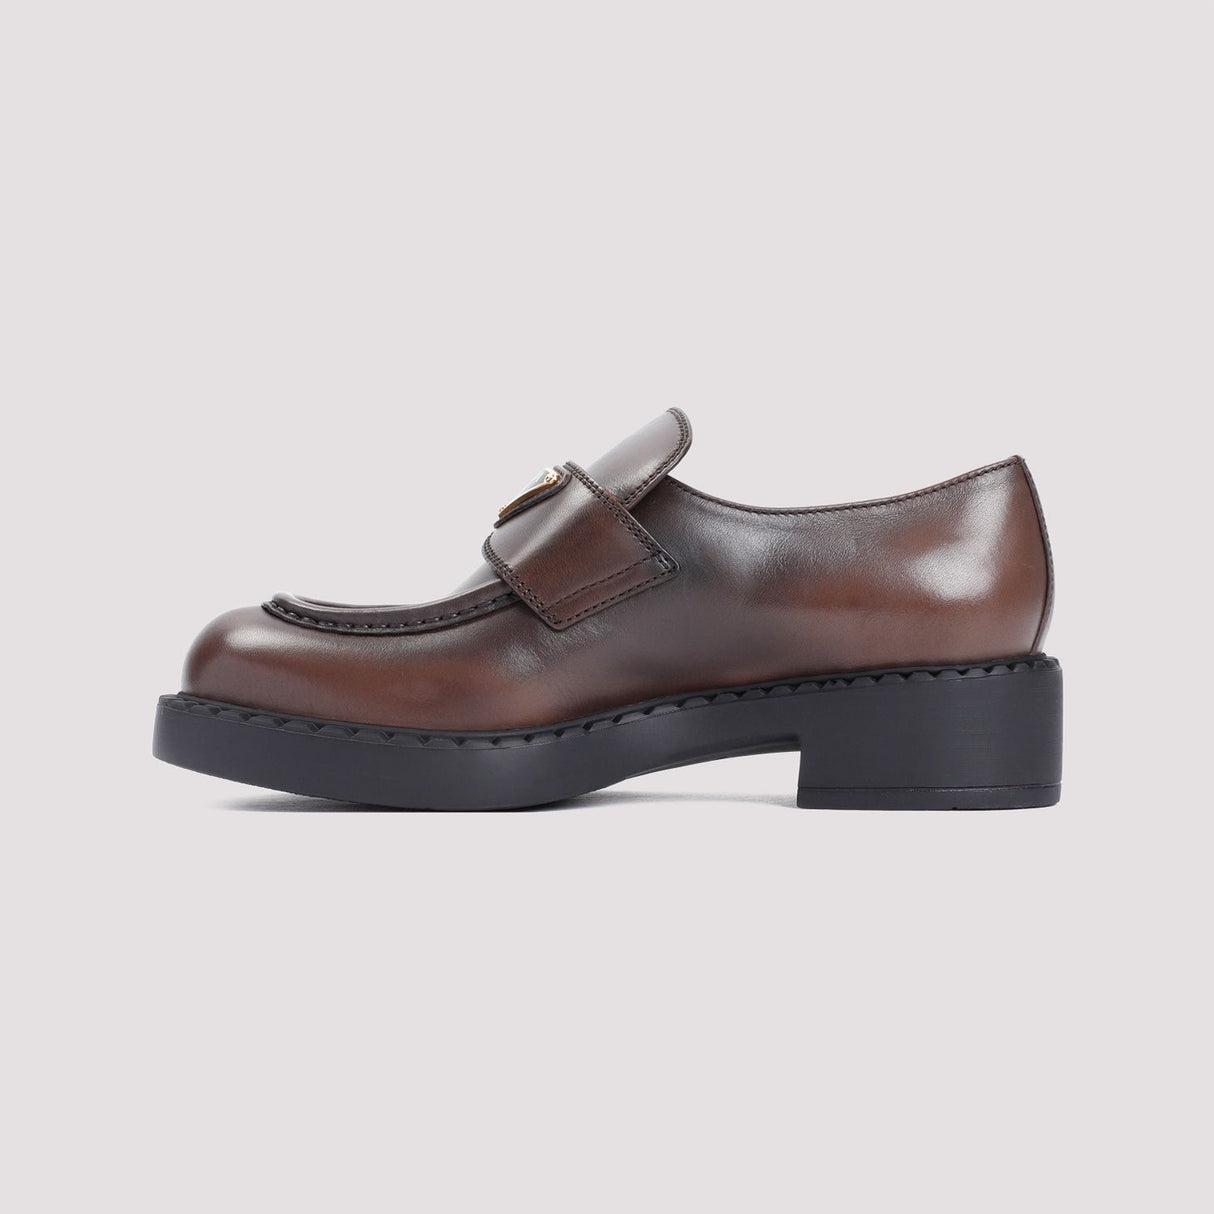 PRADA 100% Leather LEATHER LOAFERS